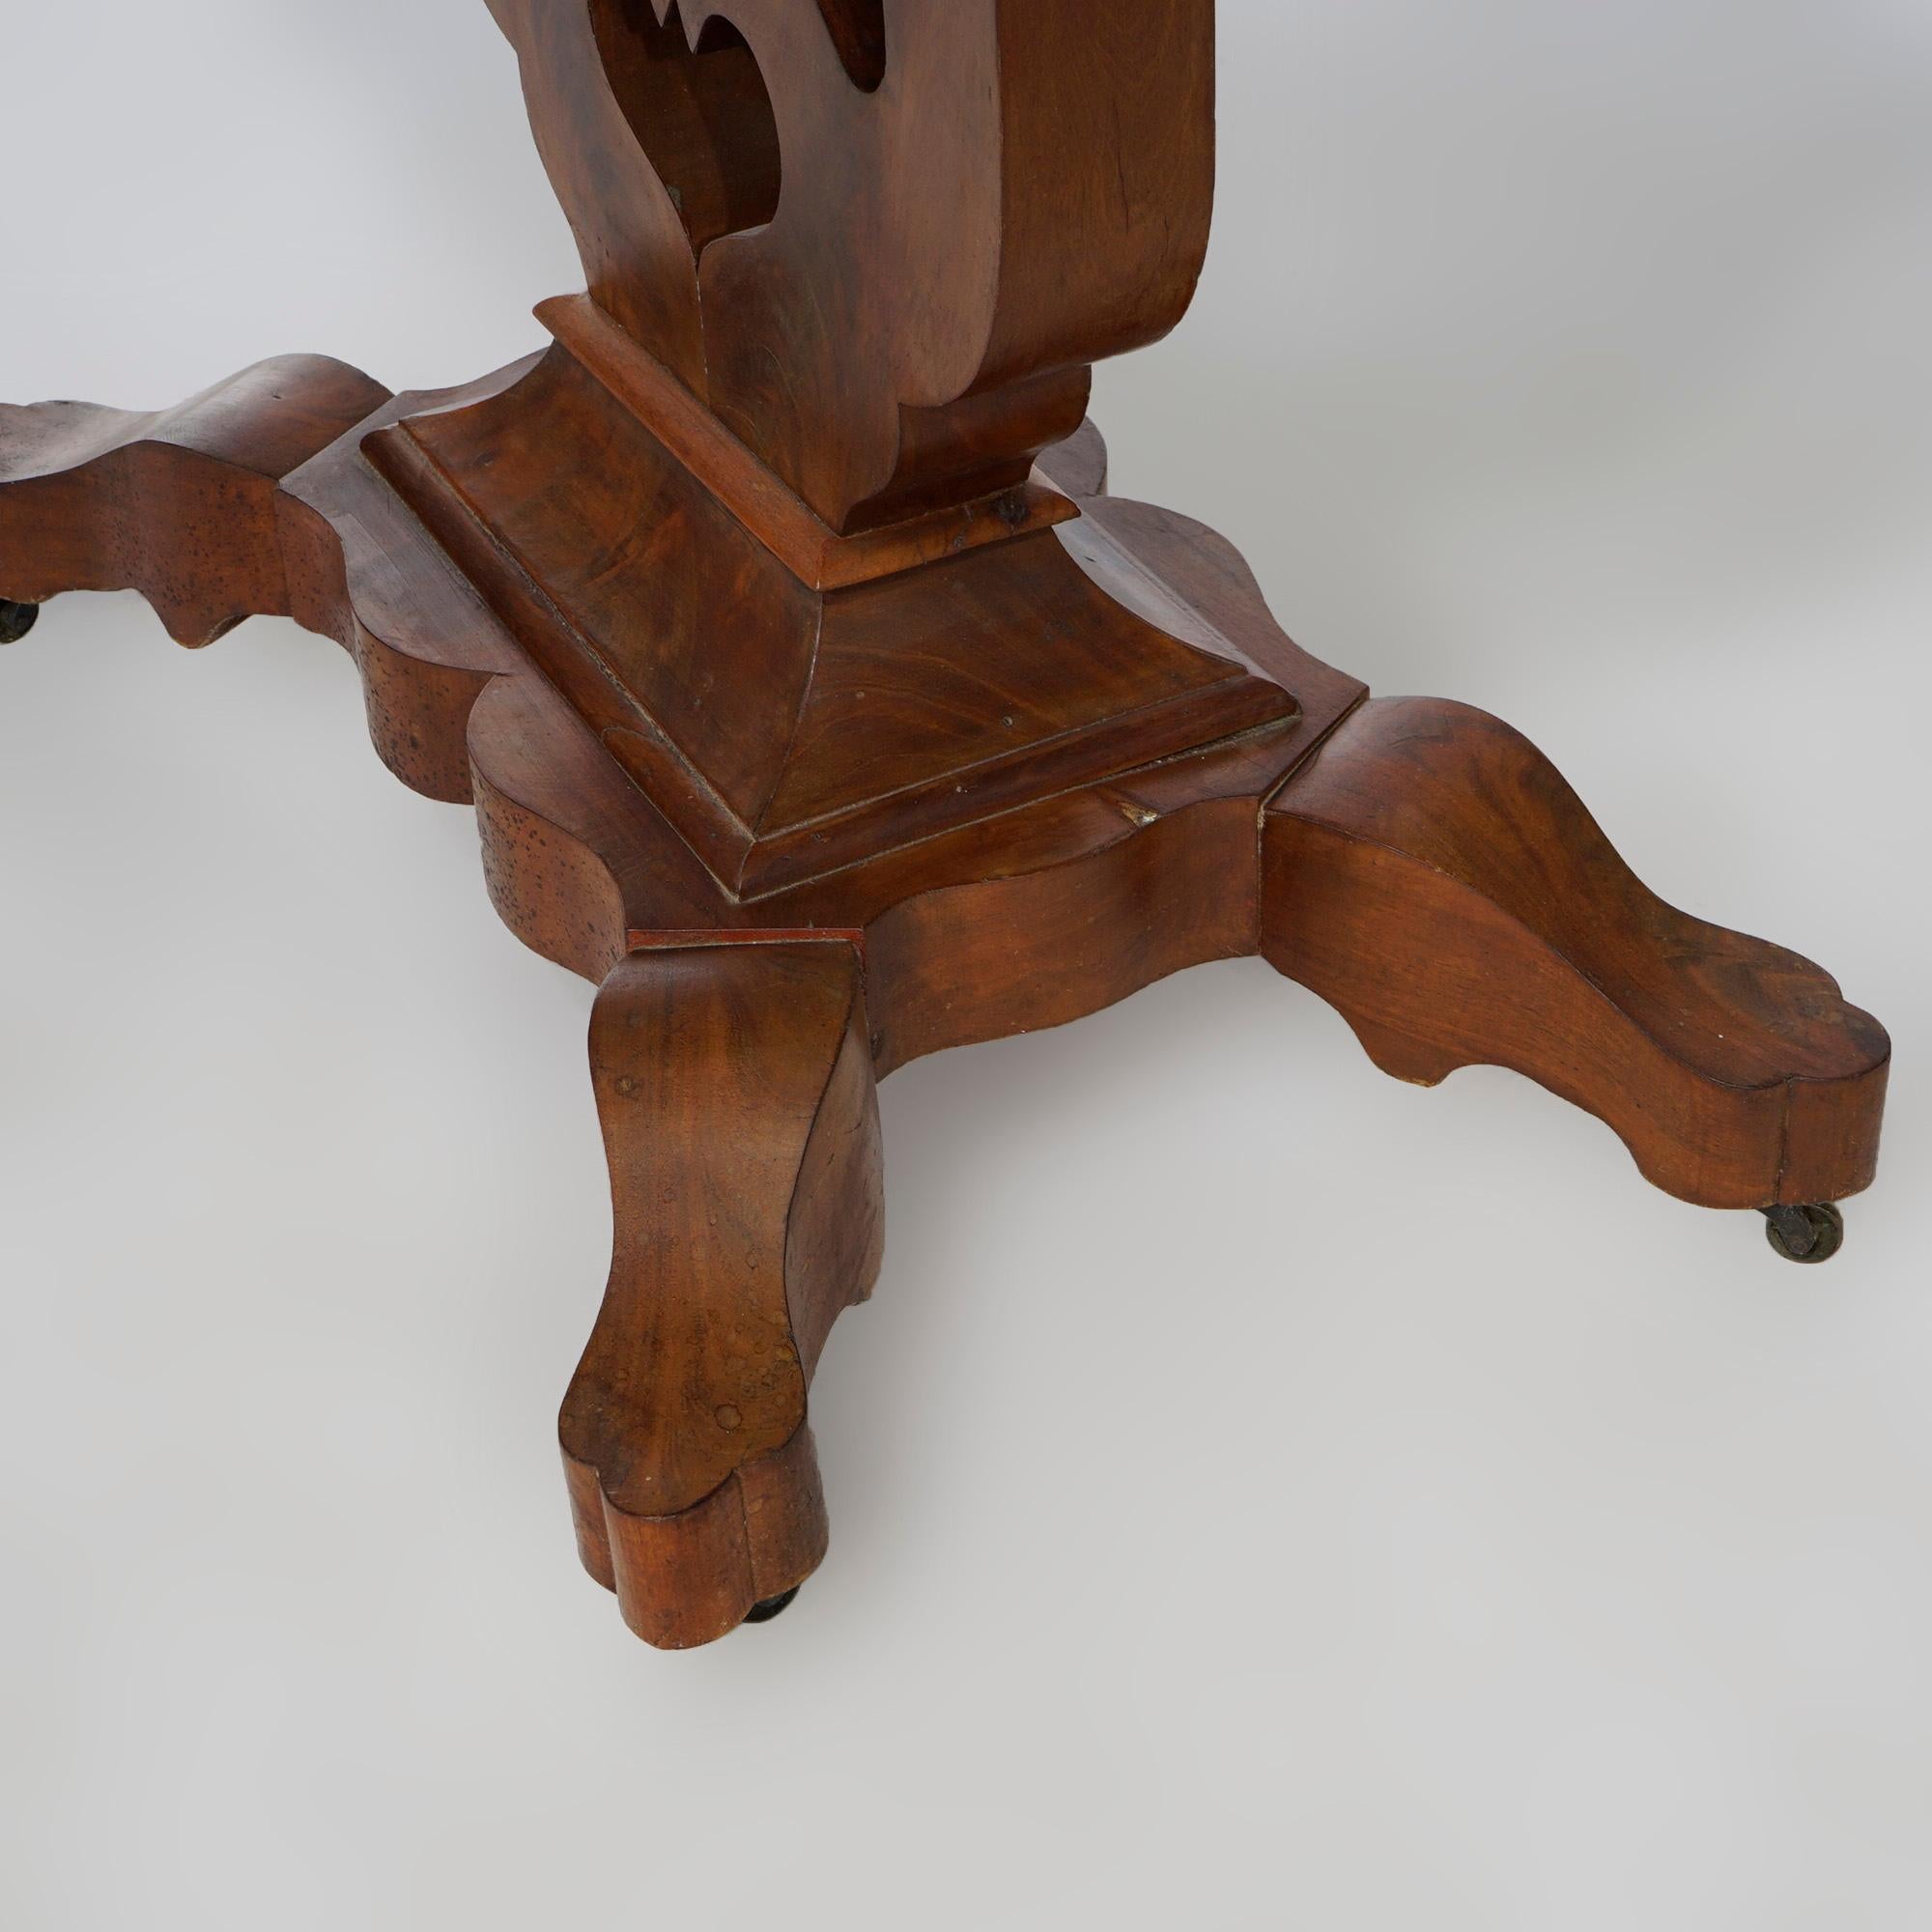 Antique Neoclassical Flame Mahogany & Marble Lyre Turtle Top Parlor Table c1880 For Sale 6